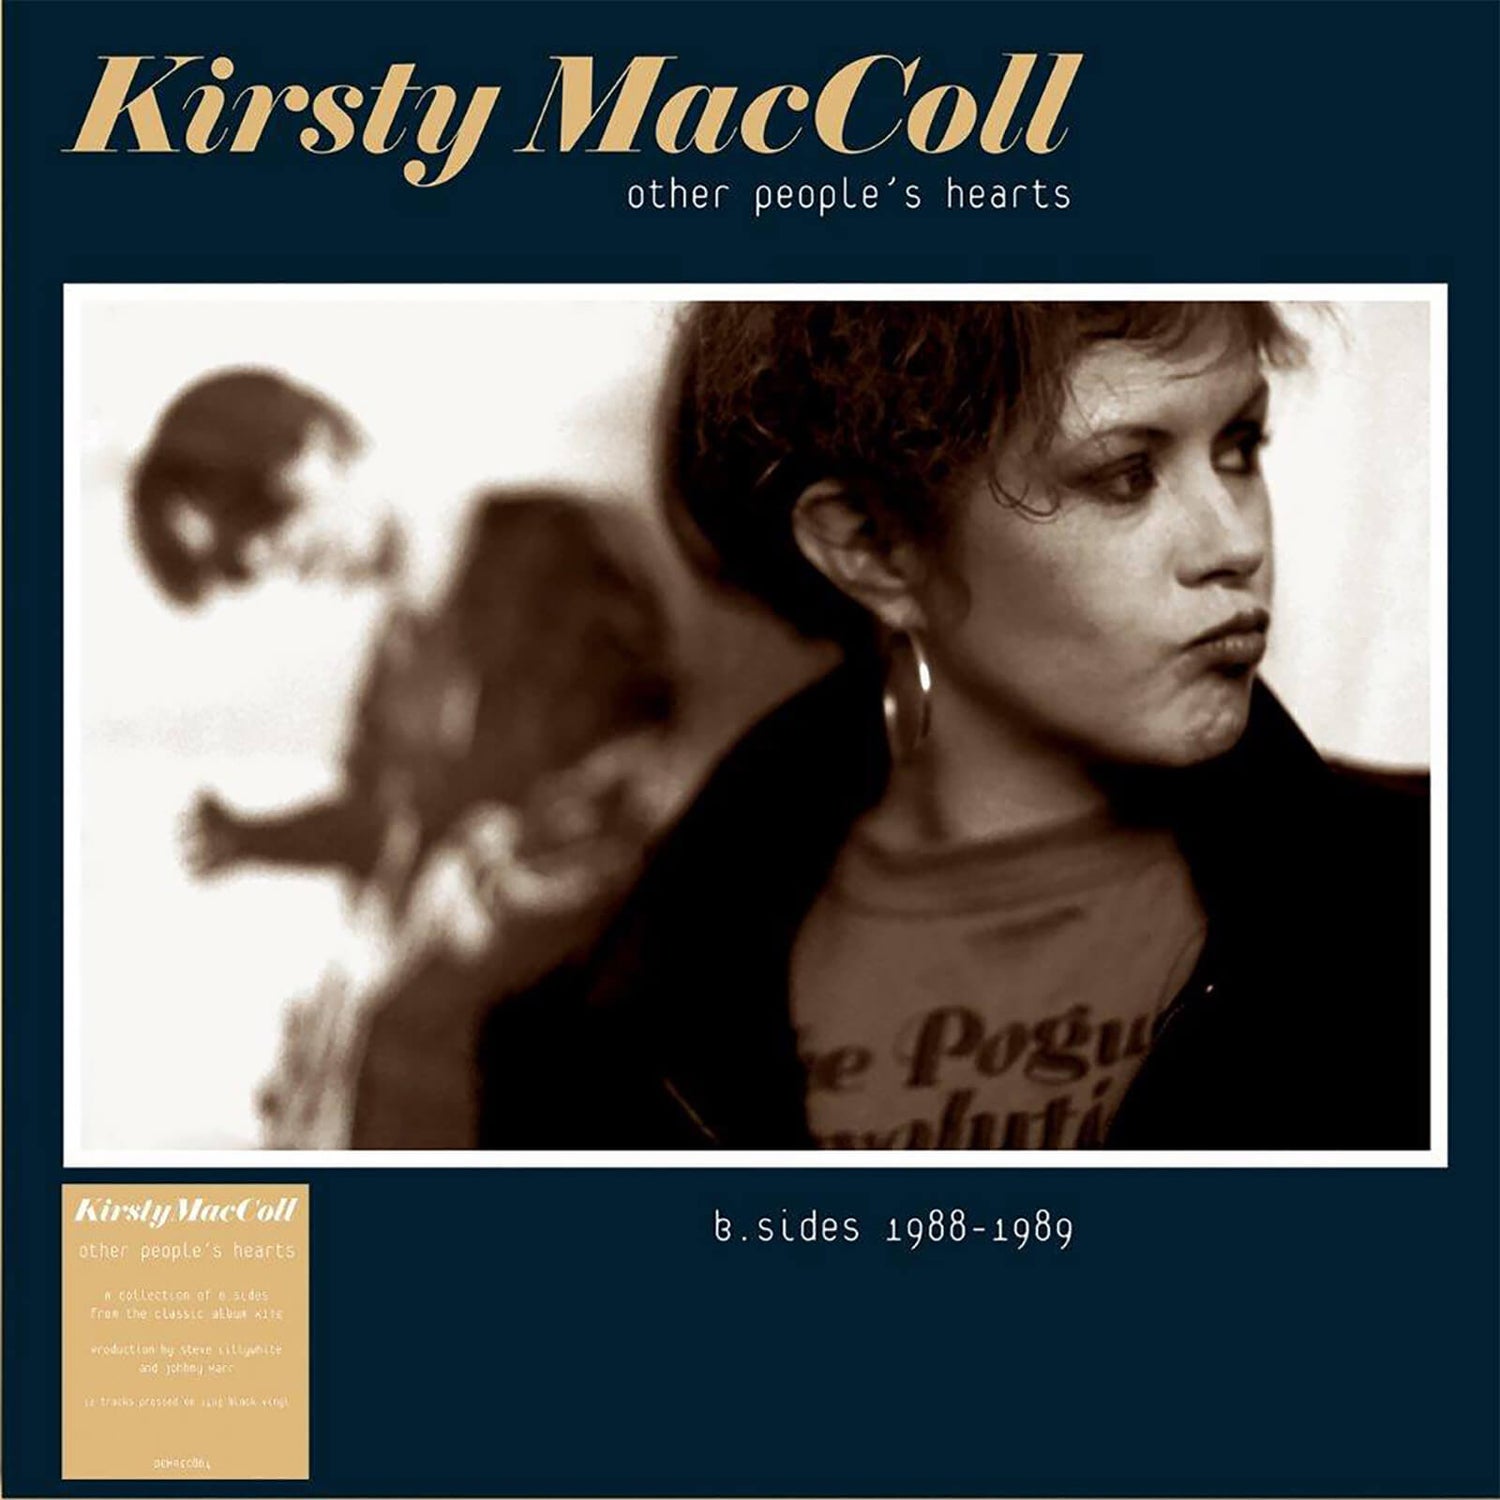 Kirsty MacColl - Other People's Hearts Vinyl